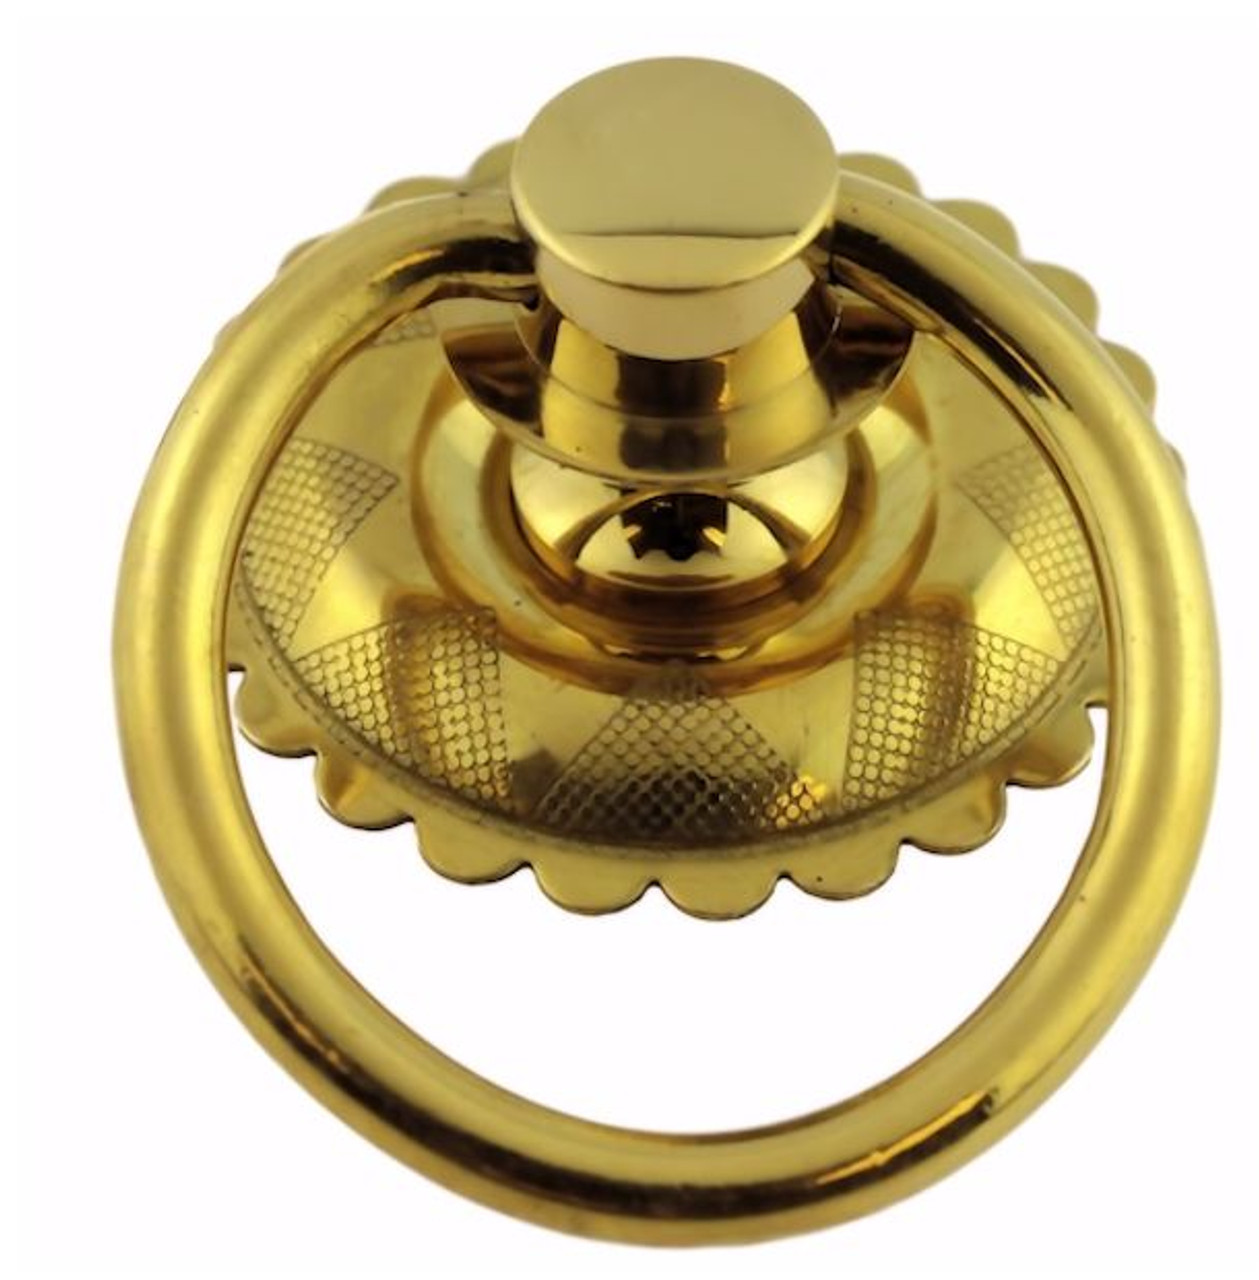 Solid Brass Oval Cabinet Knob in Antique-By-Hand - 1 1/4 x 7/8